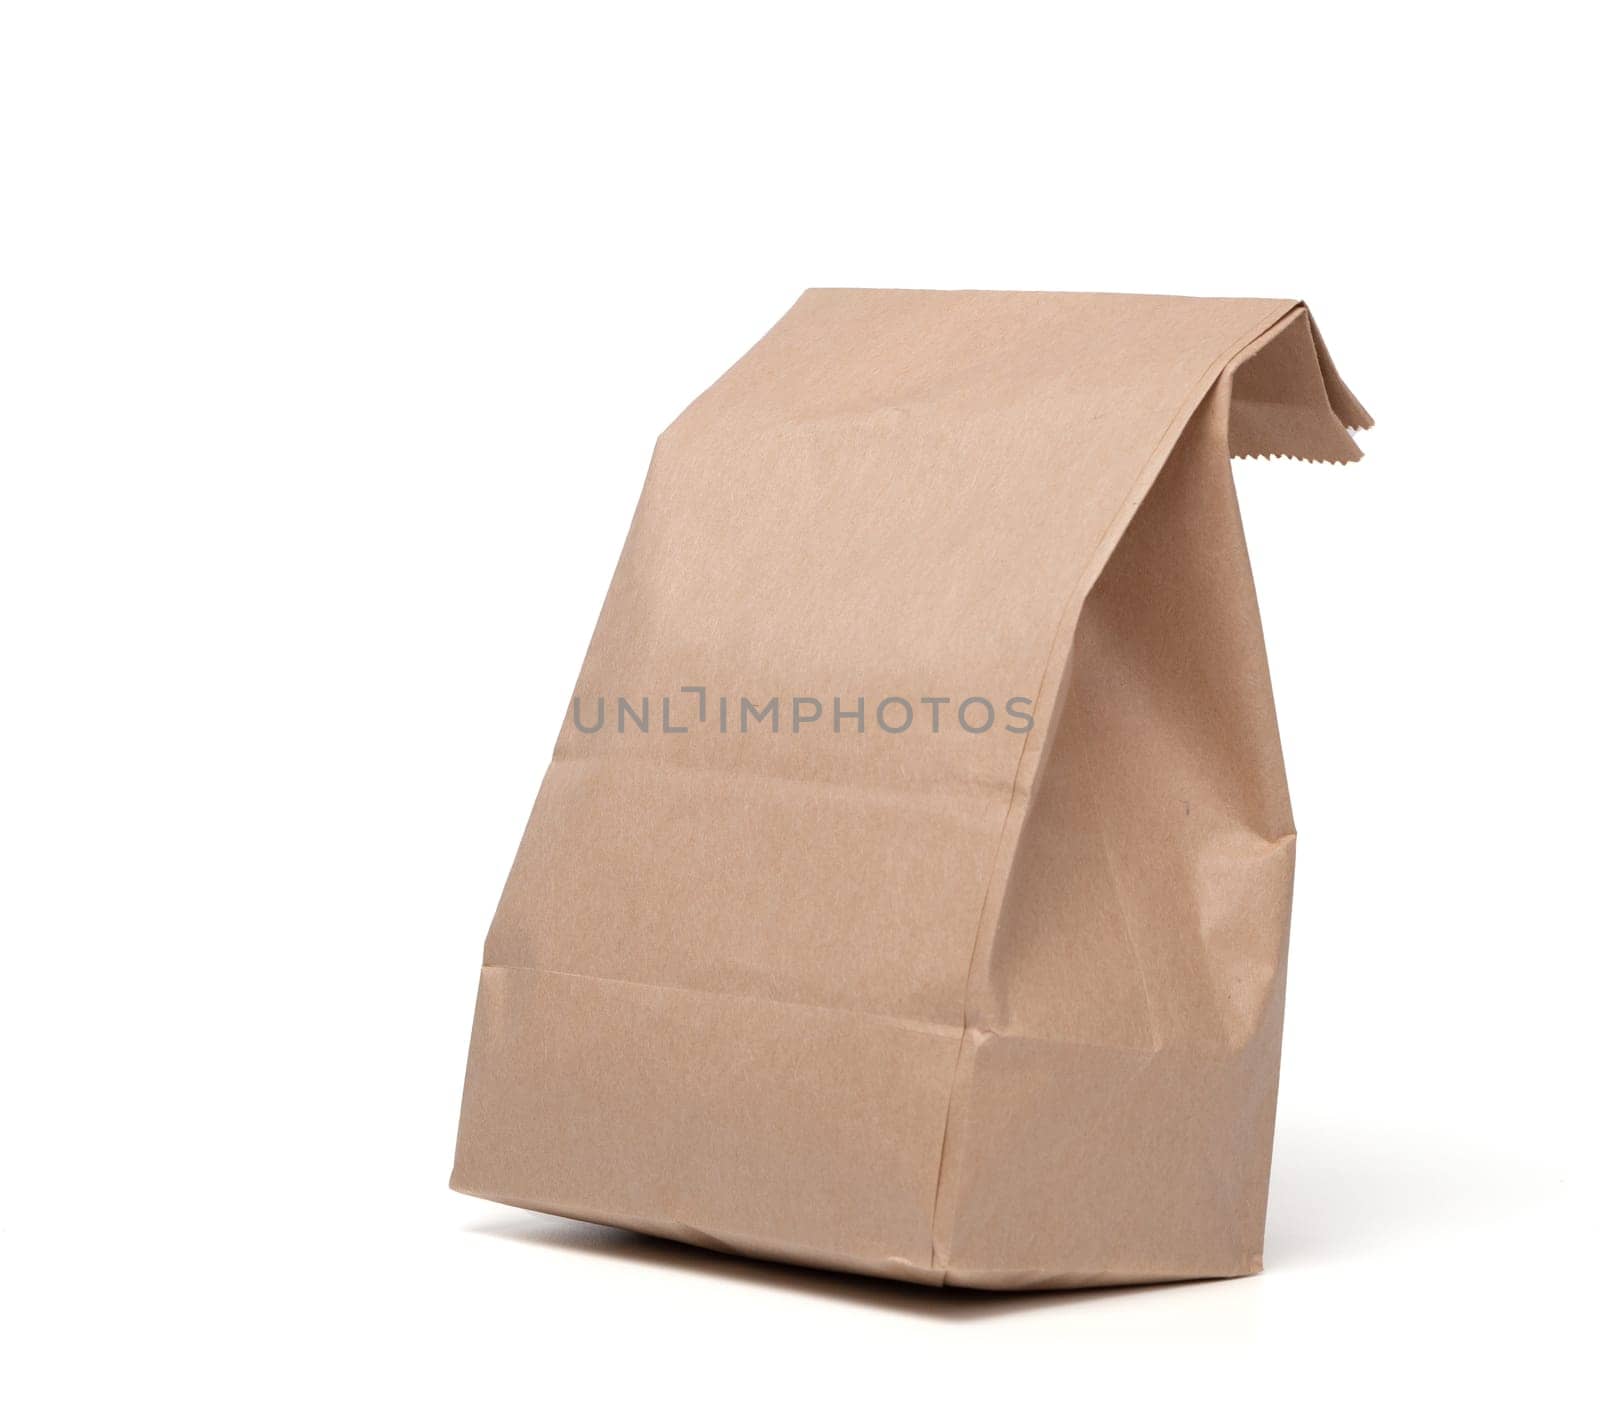 Lunch Paper bag isolated on a white background